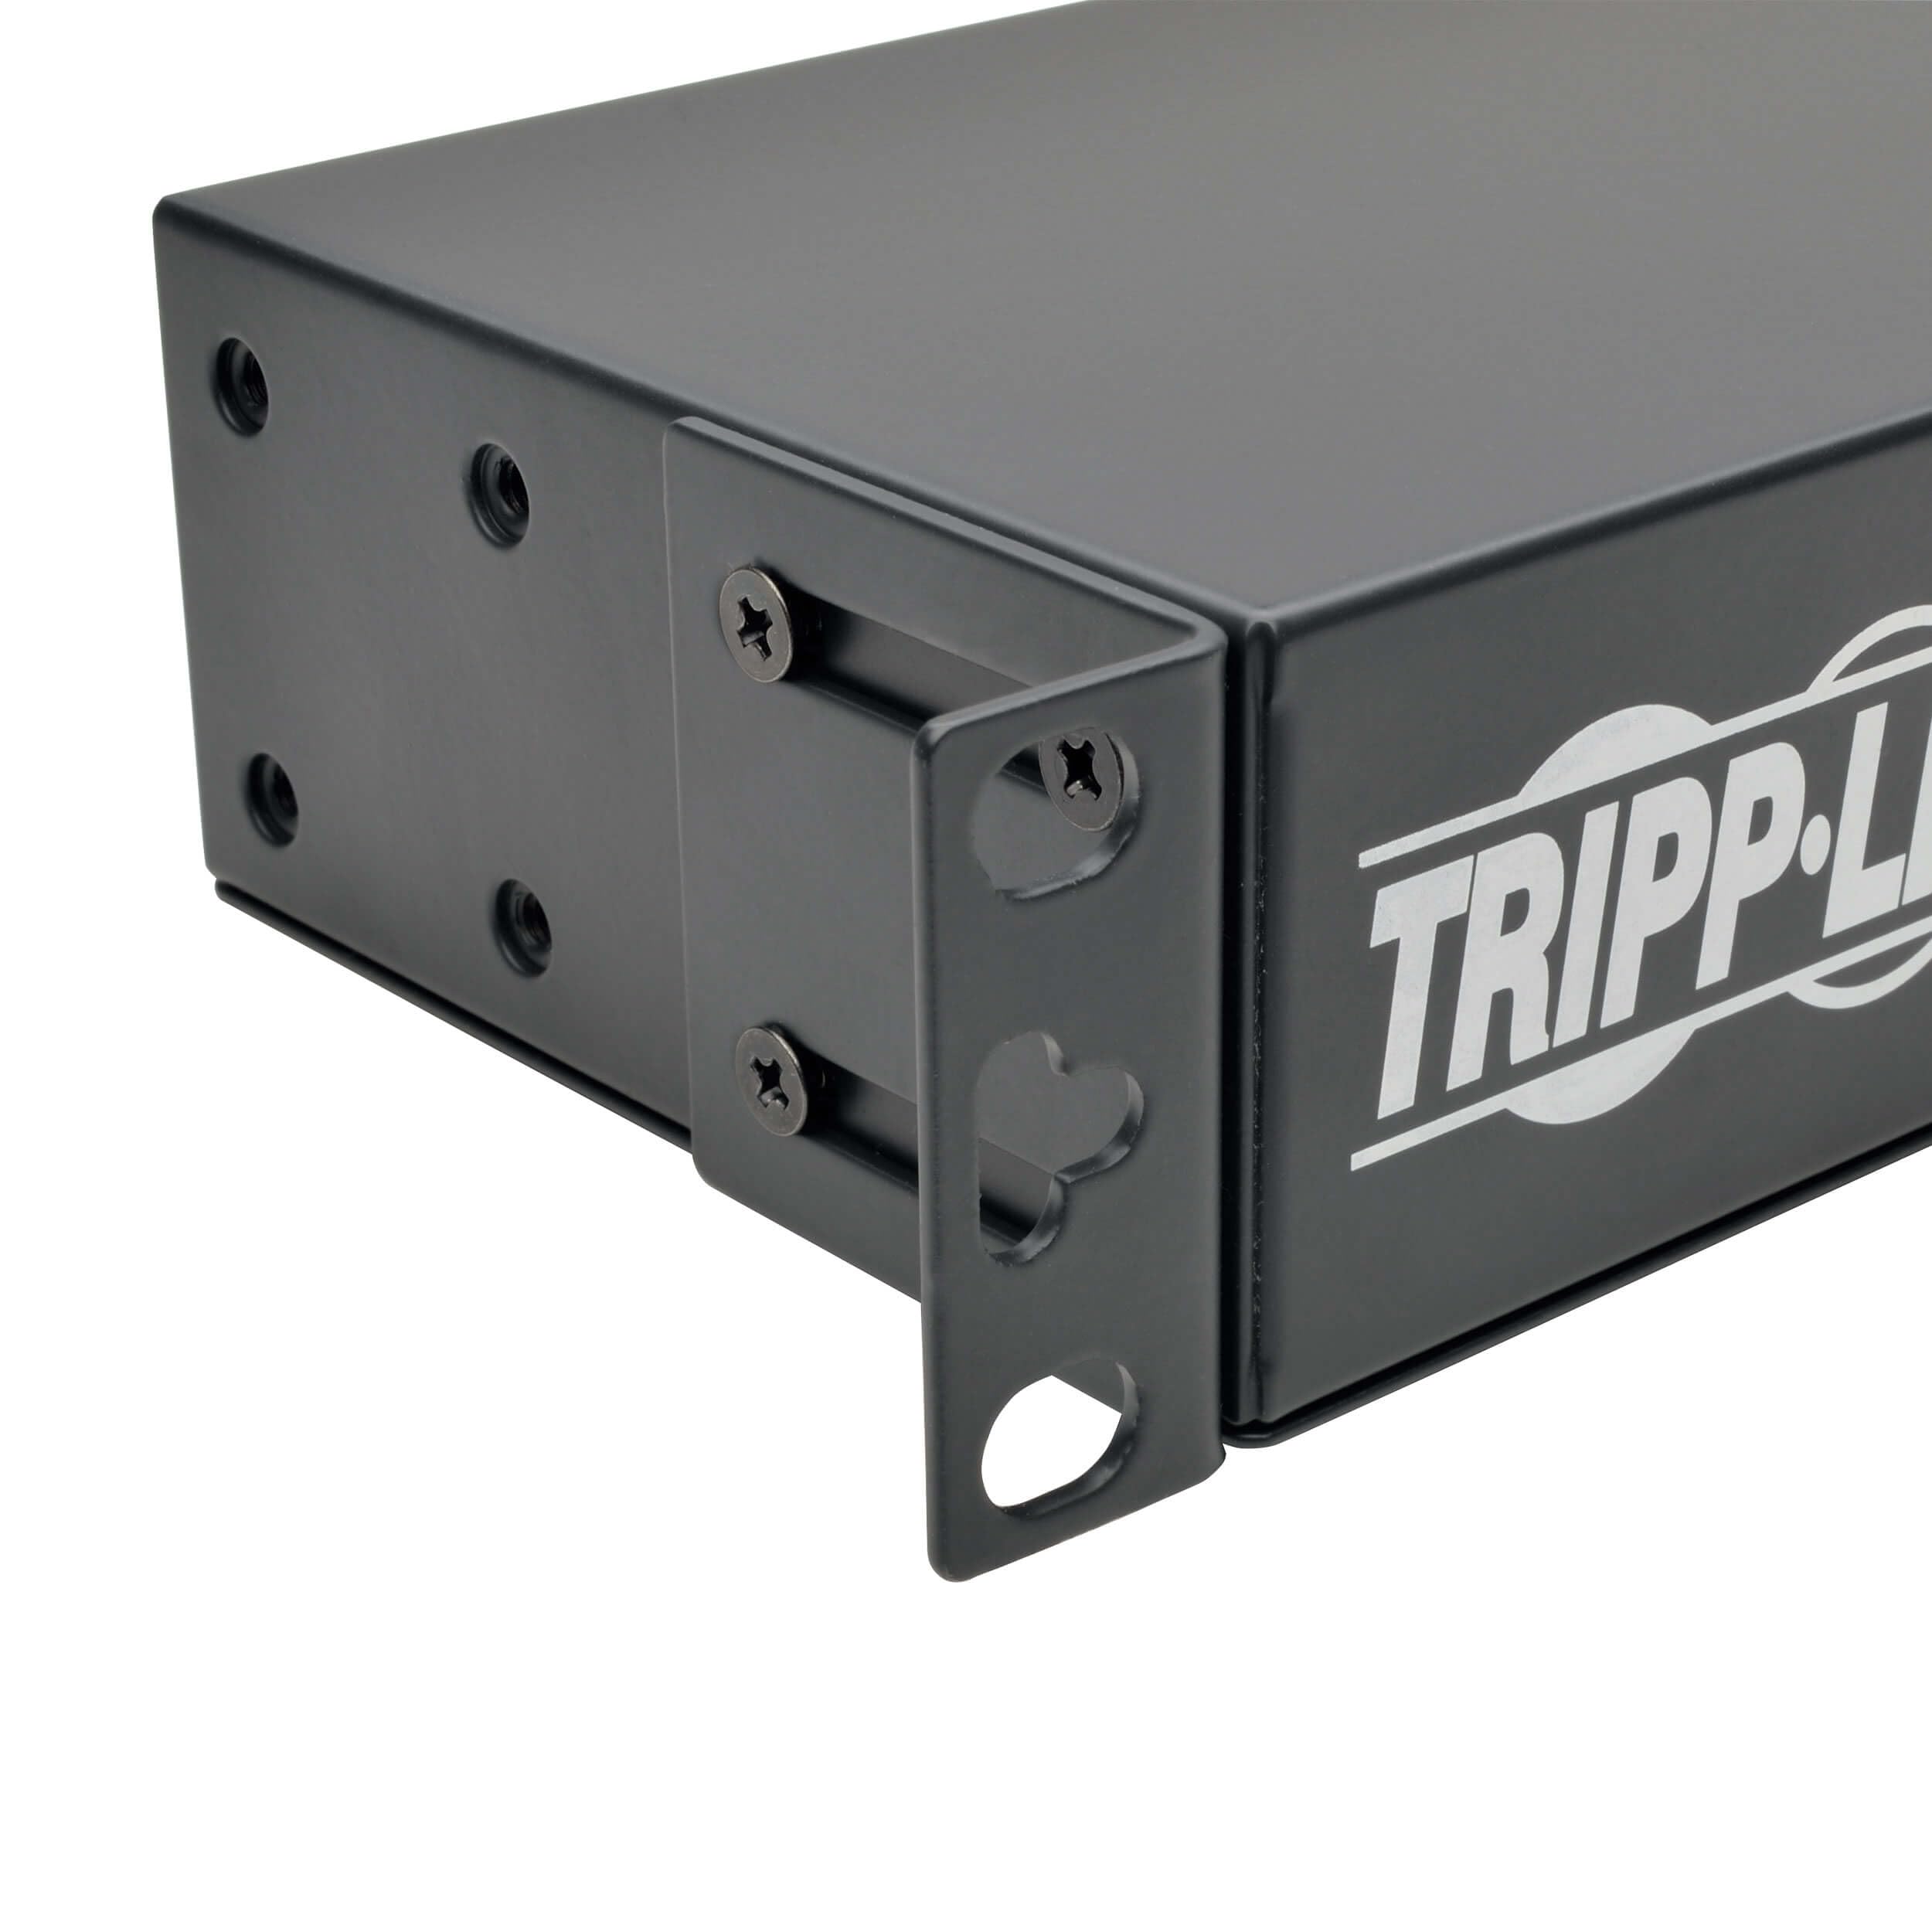 Tripp Lite Metered PDU, 15A, Isobar Surge Suppression, 3840J, 14 Outlets (5-15R), 120V, 5-15P, 15 ft. Cord, 1U Rack-Mount Power (PDUMH15-ISO)